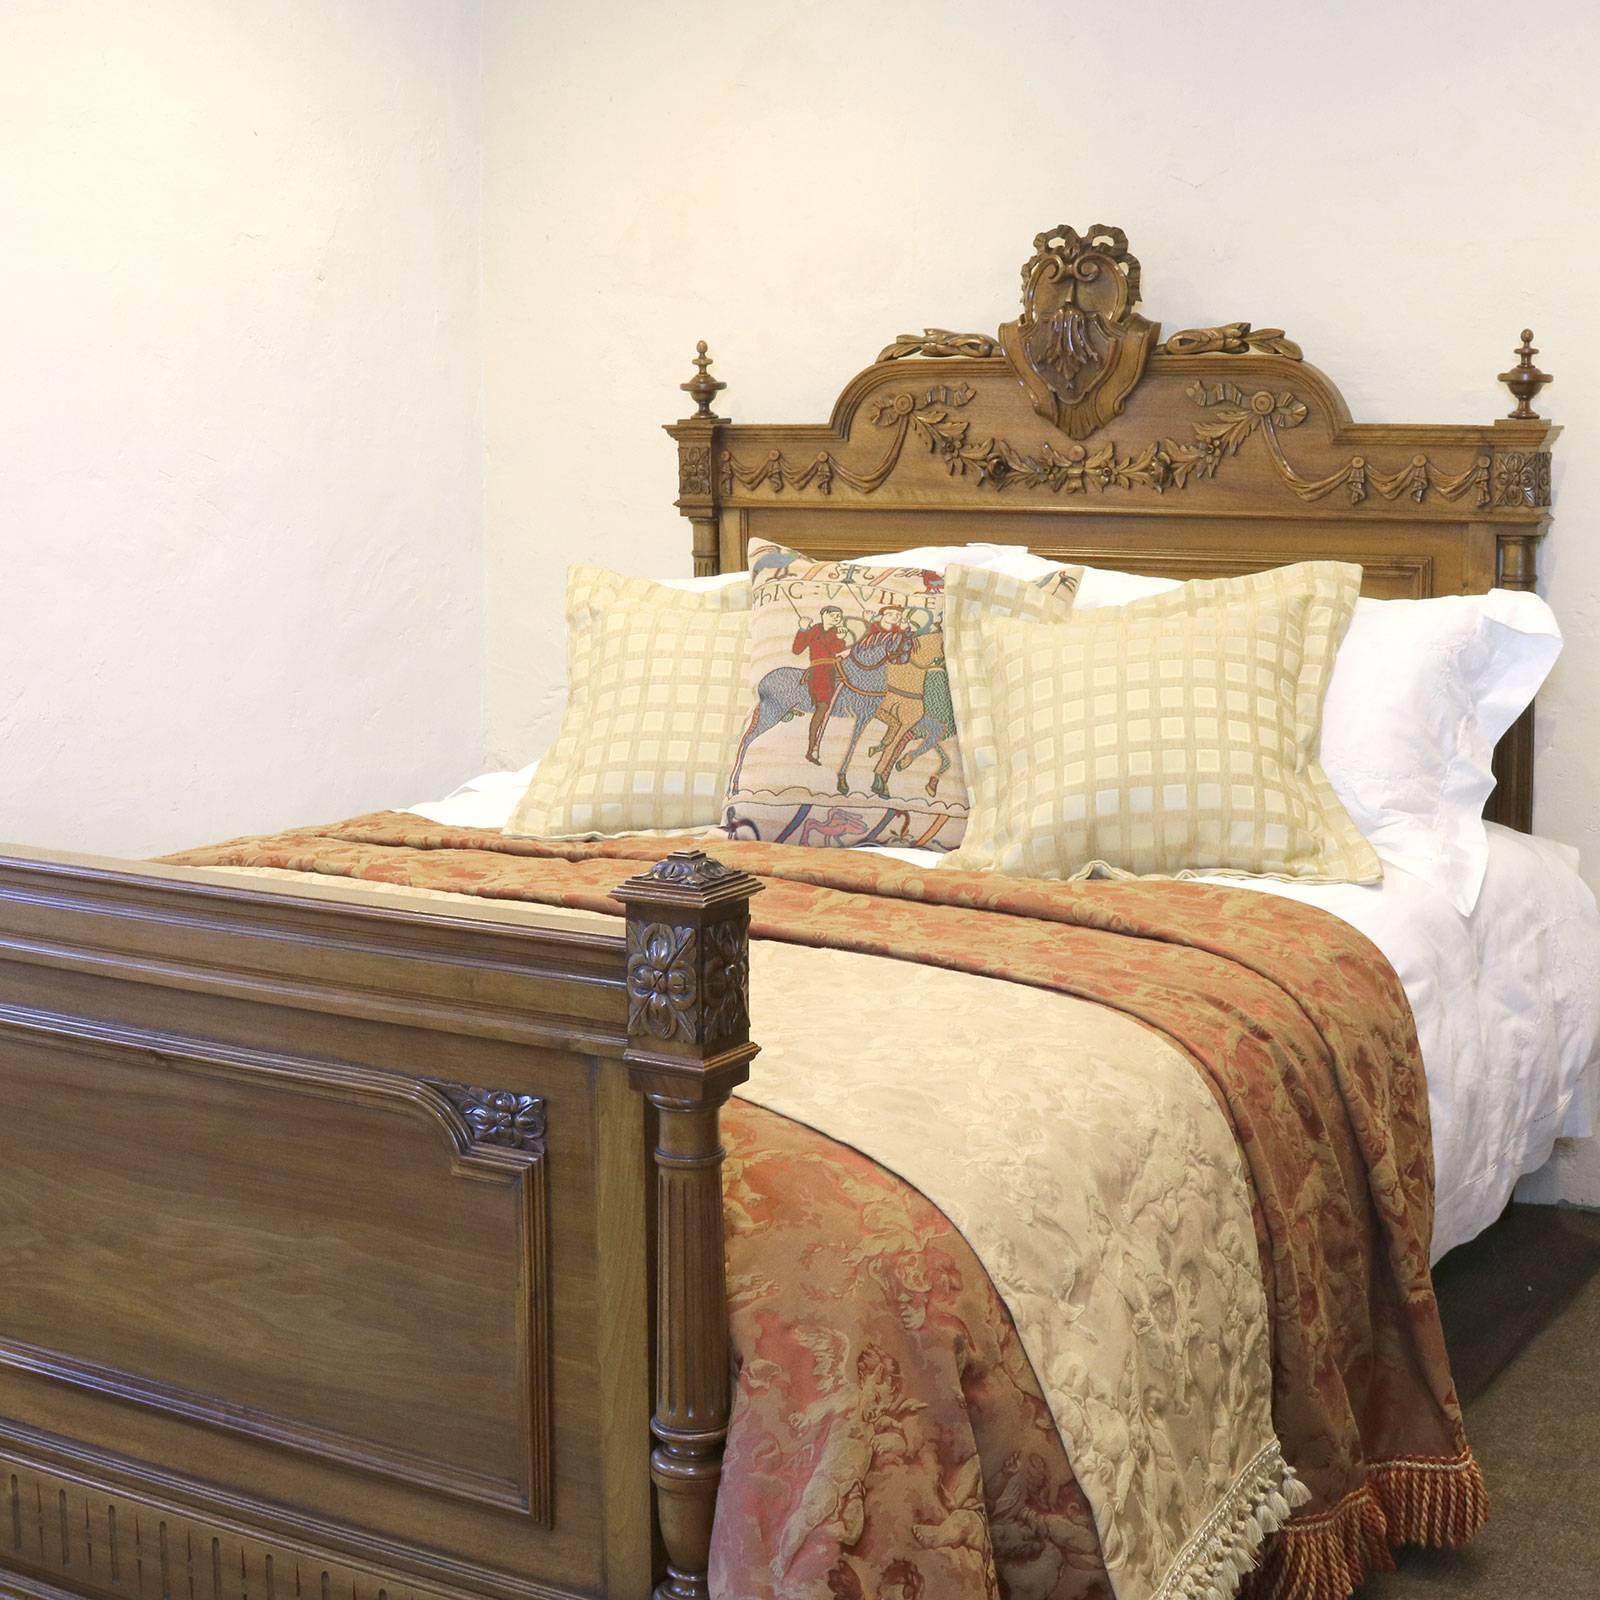 A wooden antique bed with fine carvings, turned finials and decorative pediment. 

This bed accepts a British king-size or American queen-size (60 inches, 5ft or 150cm wide) base and mattress set.

The price is for the bed frame alone. The base,